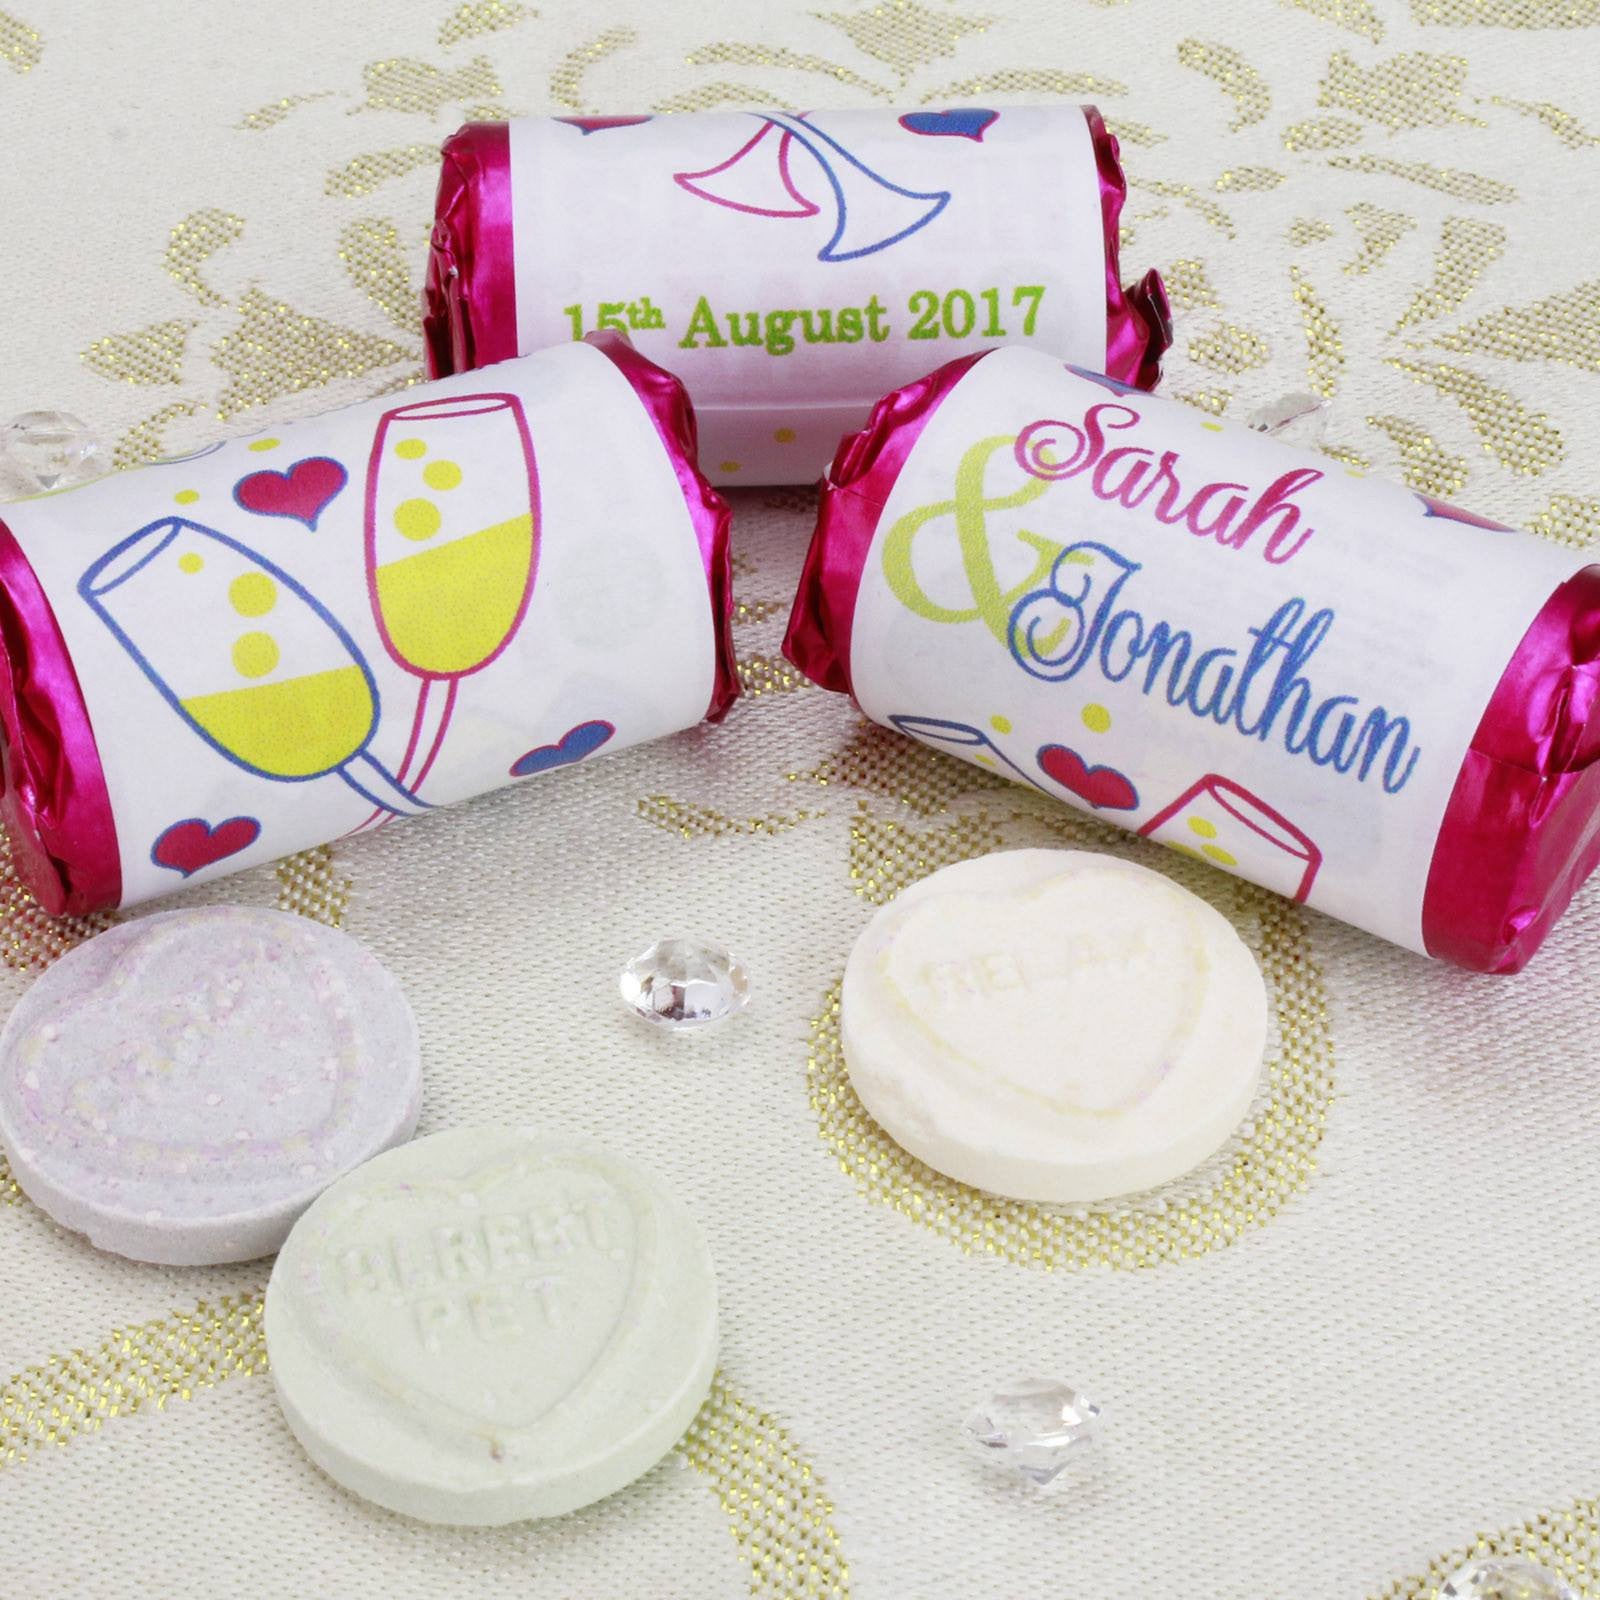 Love Hearts - Personalised Mini Love Hearts Rolls Sweets Favour - Wedding - Glasses